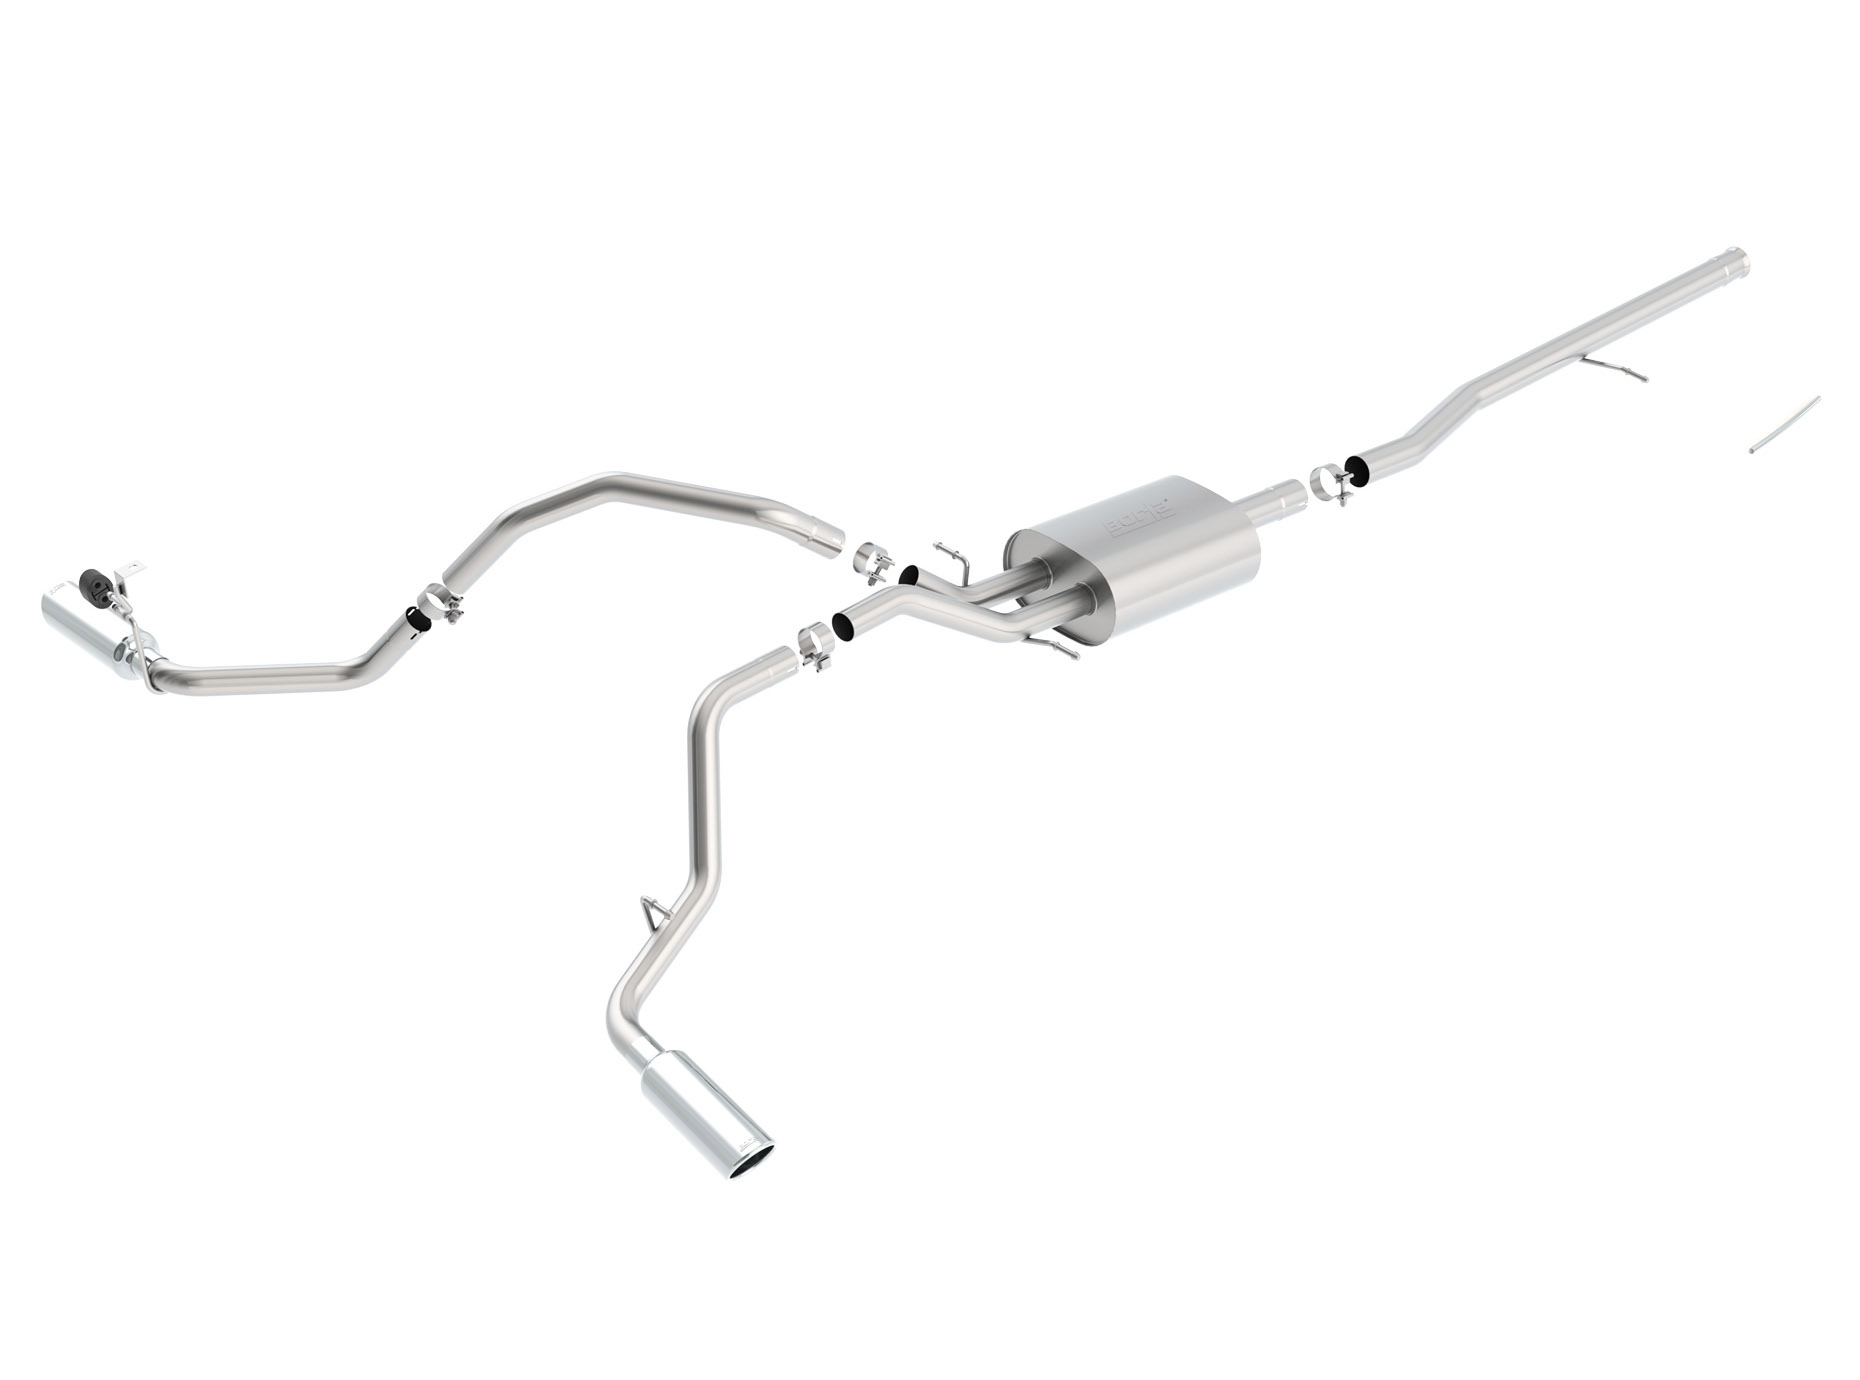 2014-2018 Chevy/GMC 1500 Borla S-Type Catback Exhaust System w/Rear Side Exit Tips - Ext. Cab/Std. Box & Crew Cab/Short Bed